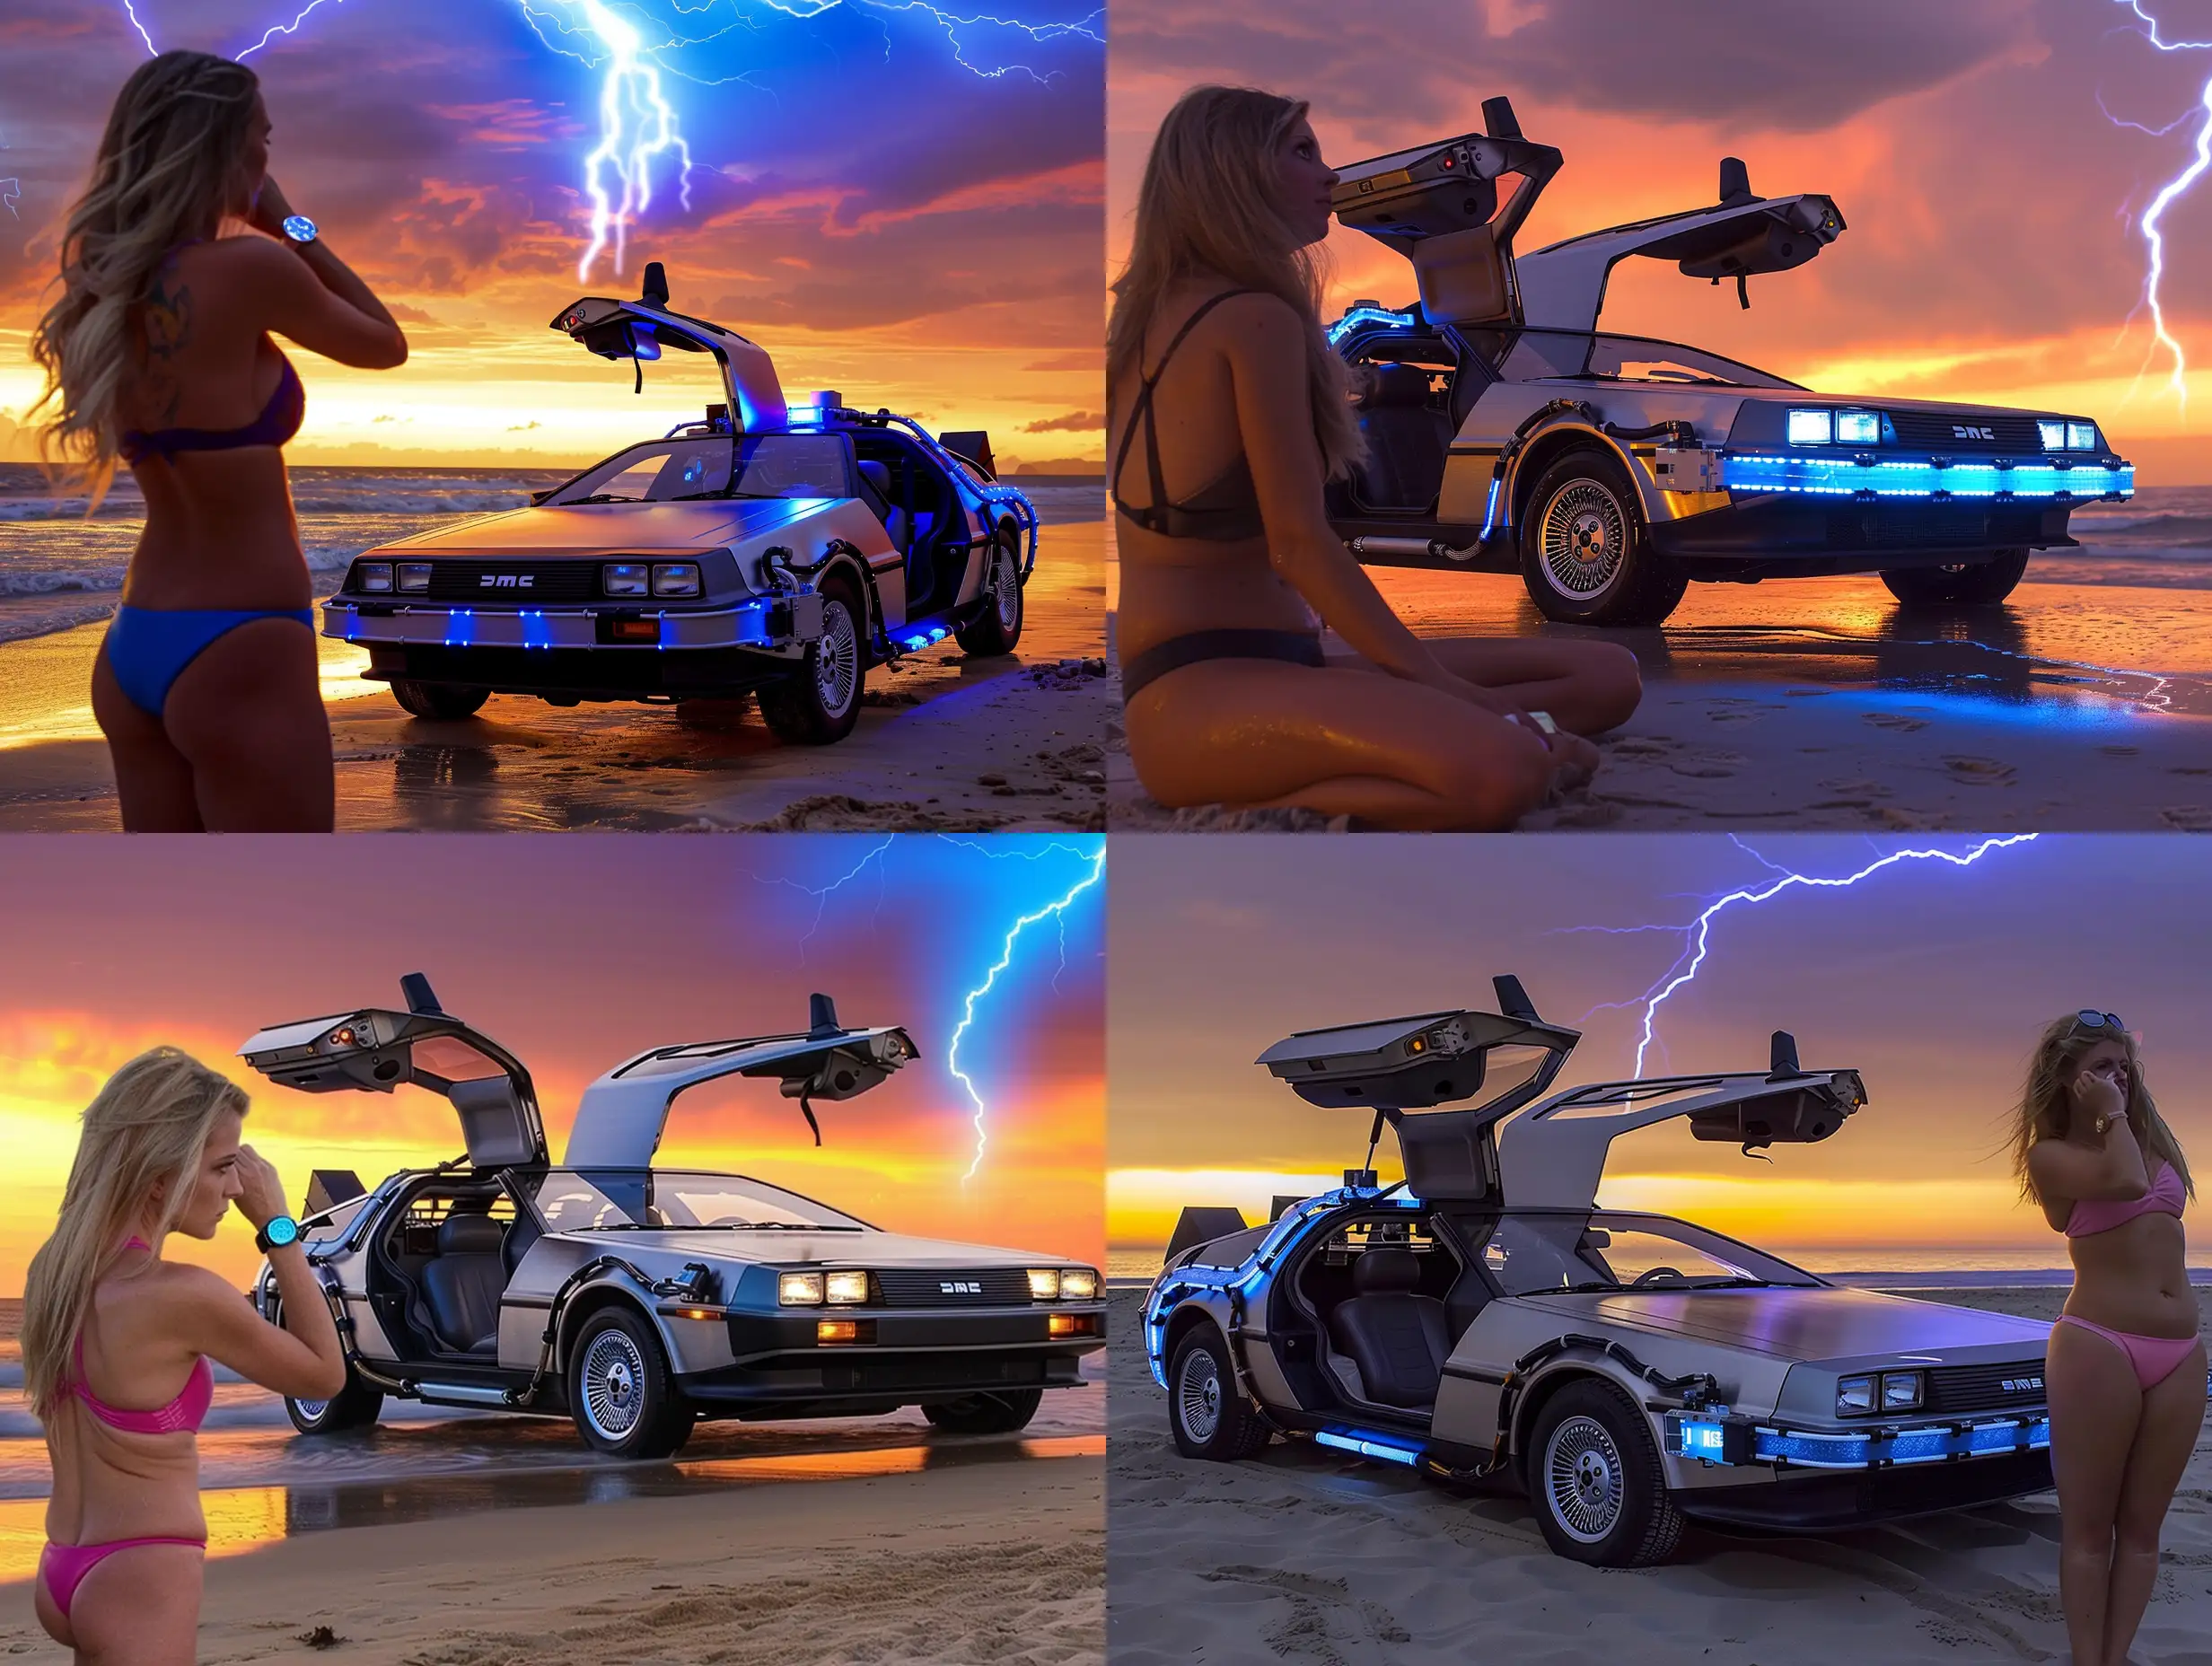 Back to the future delorean on beach at vibrant sunset with blue lightning in sky and blonde in bikini in foreground looking at her watch